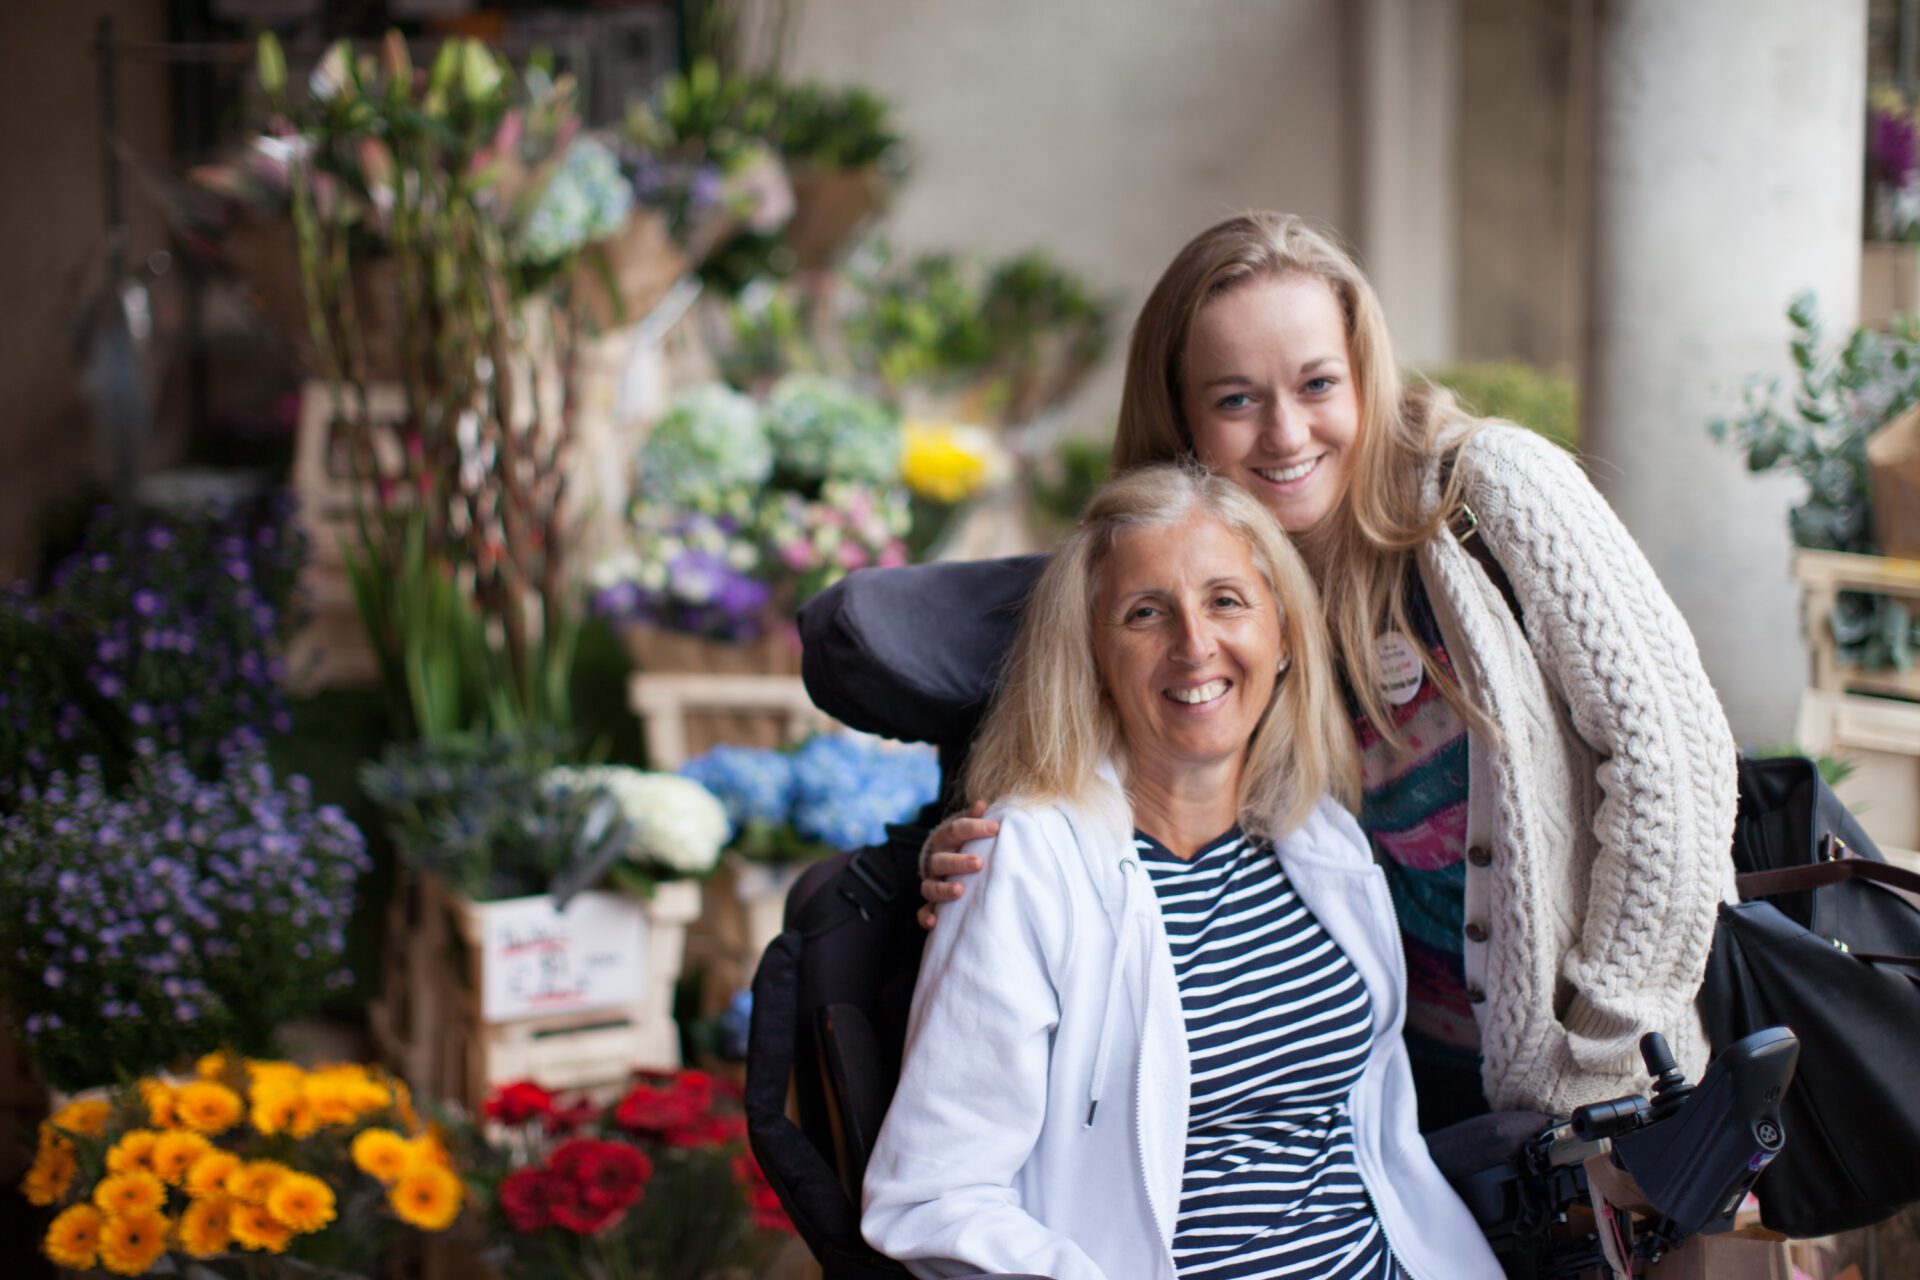 Woman in a wheelchair smiling with another young woman next to her while on a shopping excursion during a Revitalise break